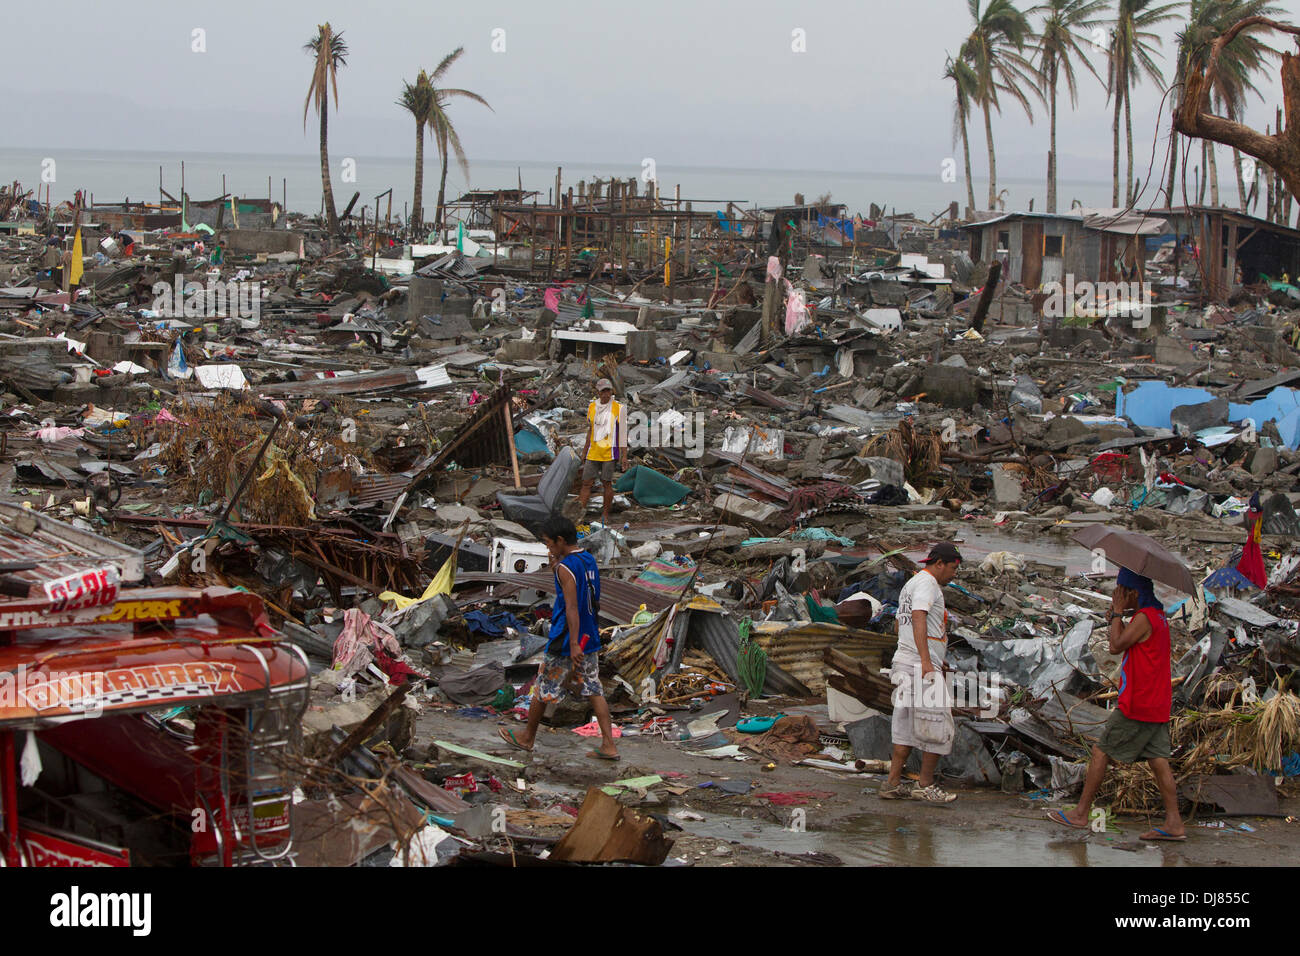 The destructive force of Typhoon haiyan/Yolanda clearly evident in this image on the approach to Tacloban Airport. Stock Photo